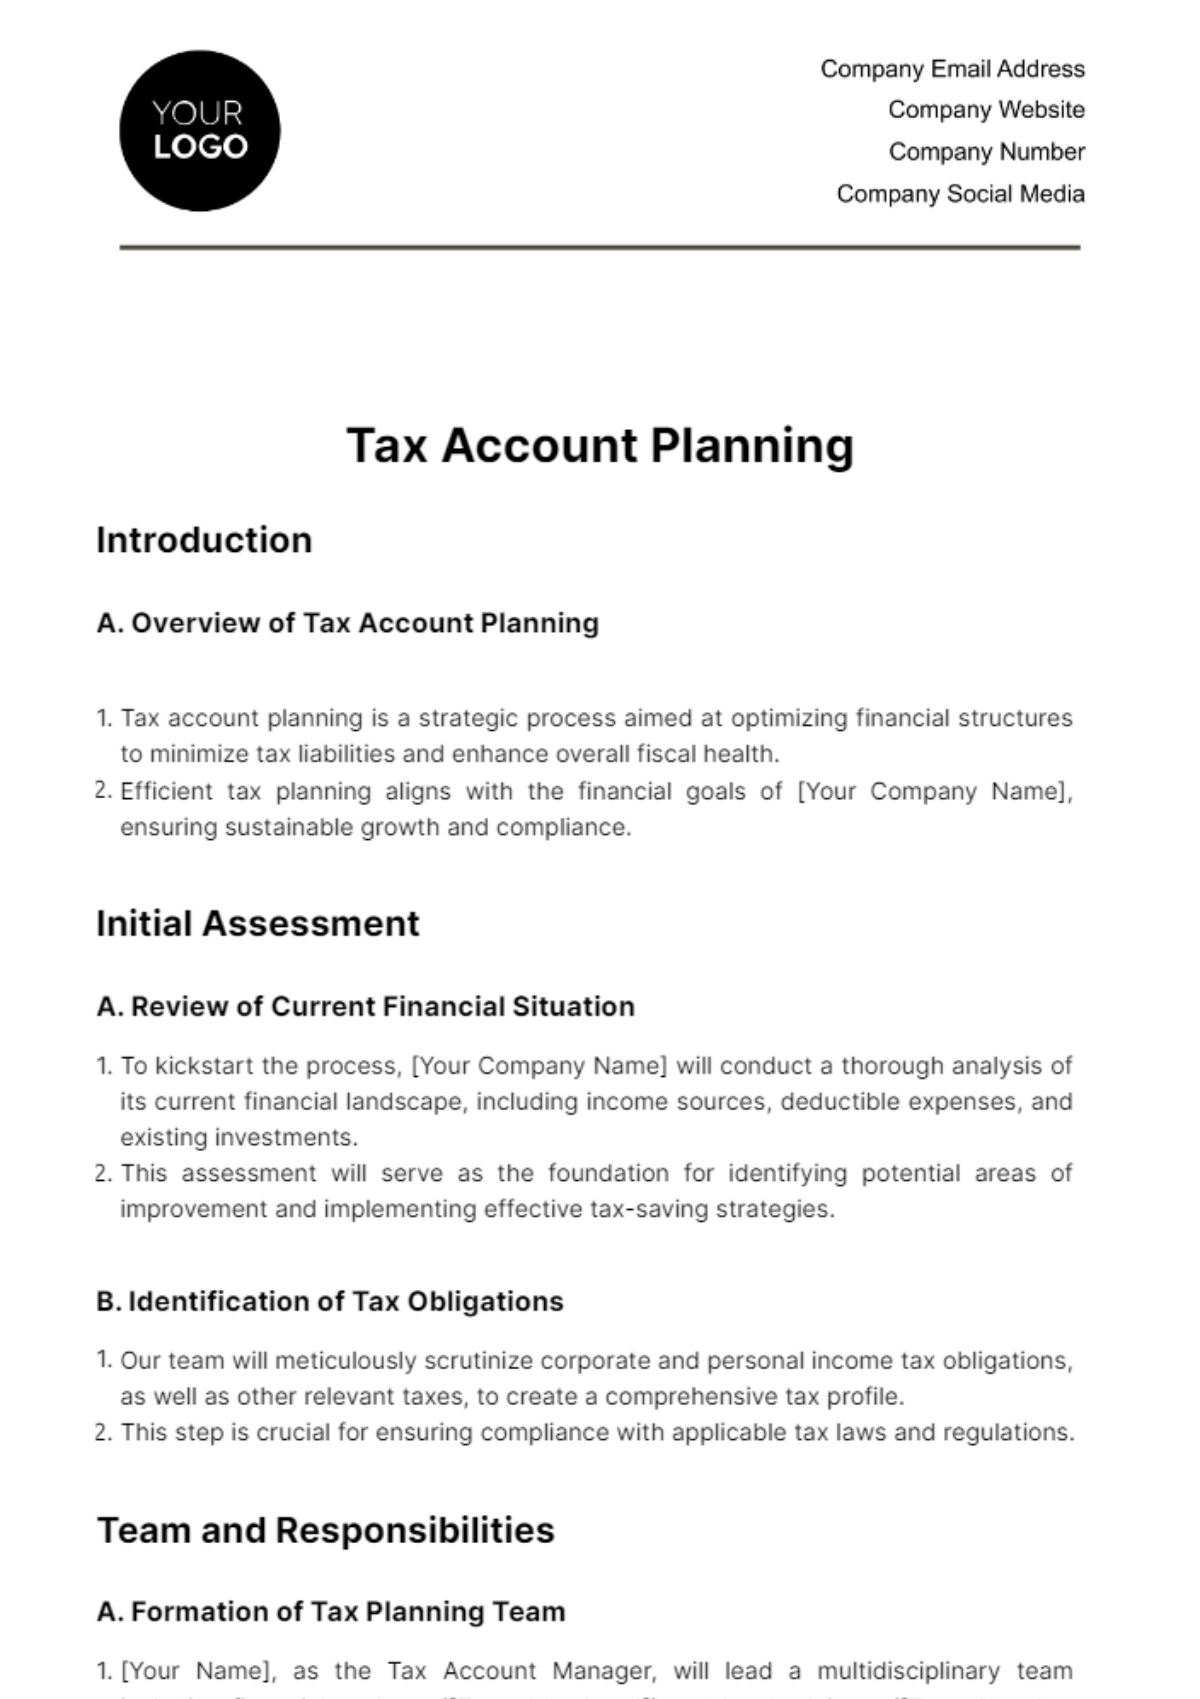 Free Tax Account Planning Template